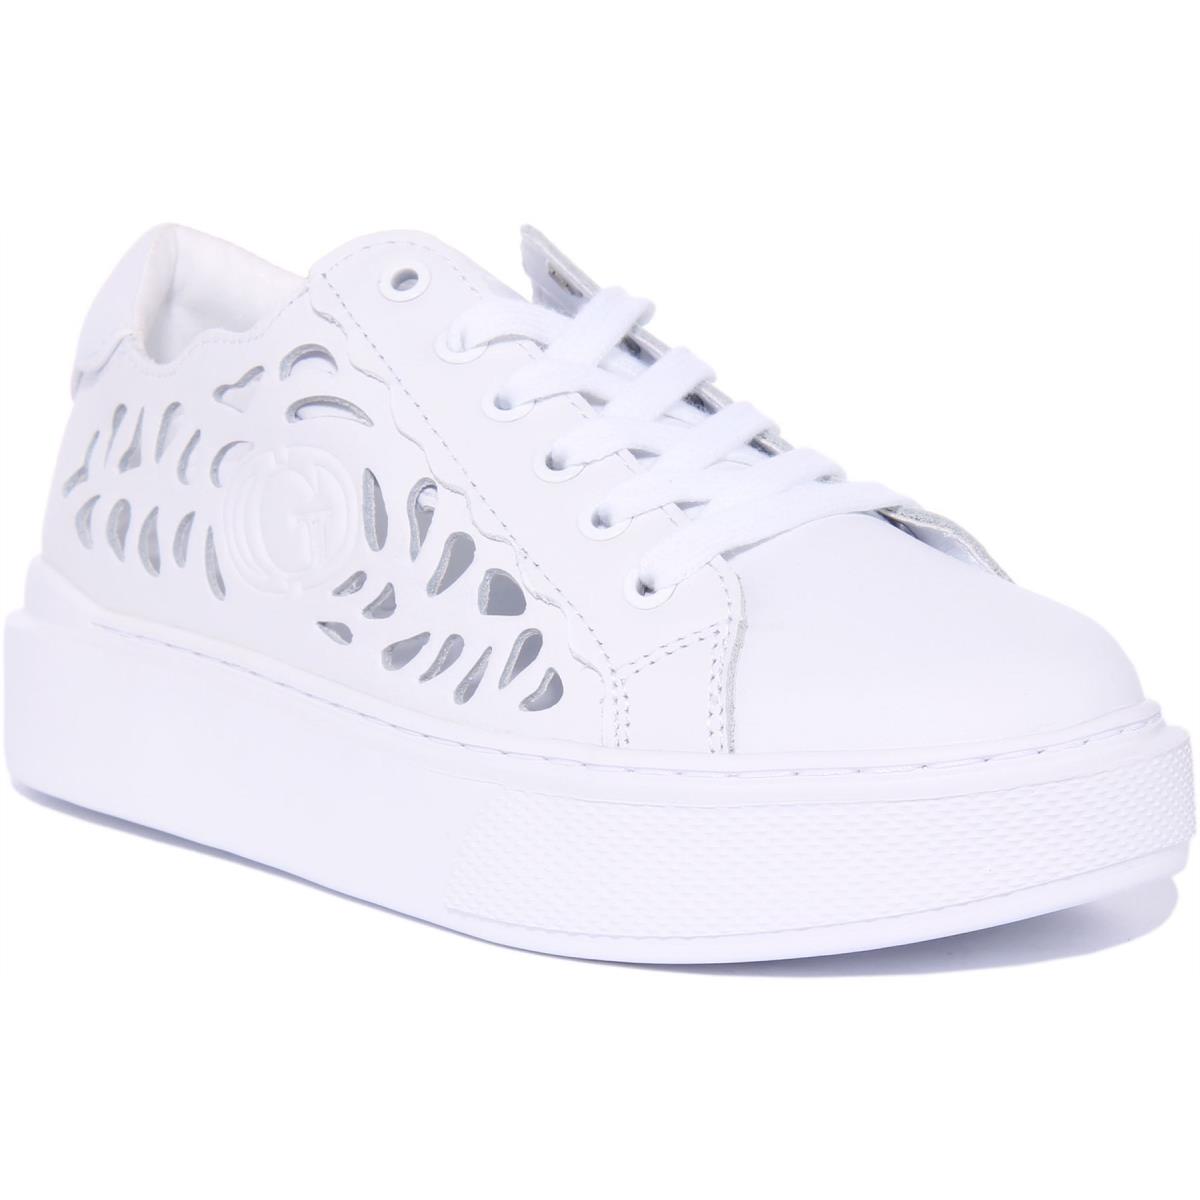 Guess Fl5Ppzlea12 Pepzi Womens Lace Up Leather Blend Sneakers Size US 5 - 11 WHITE